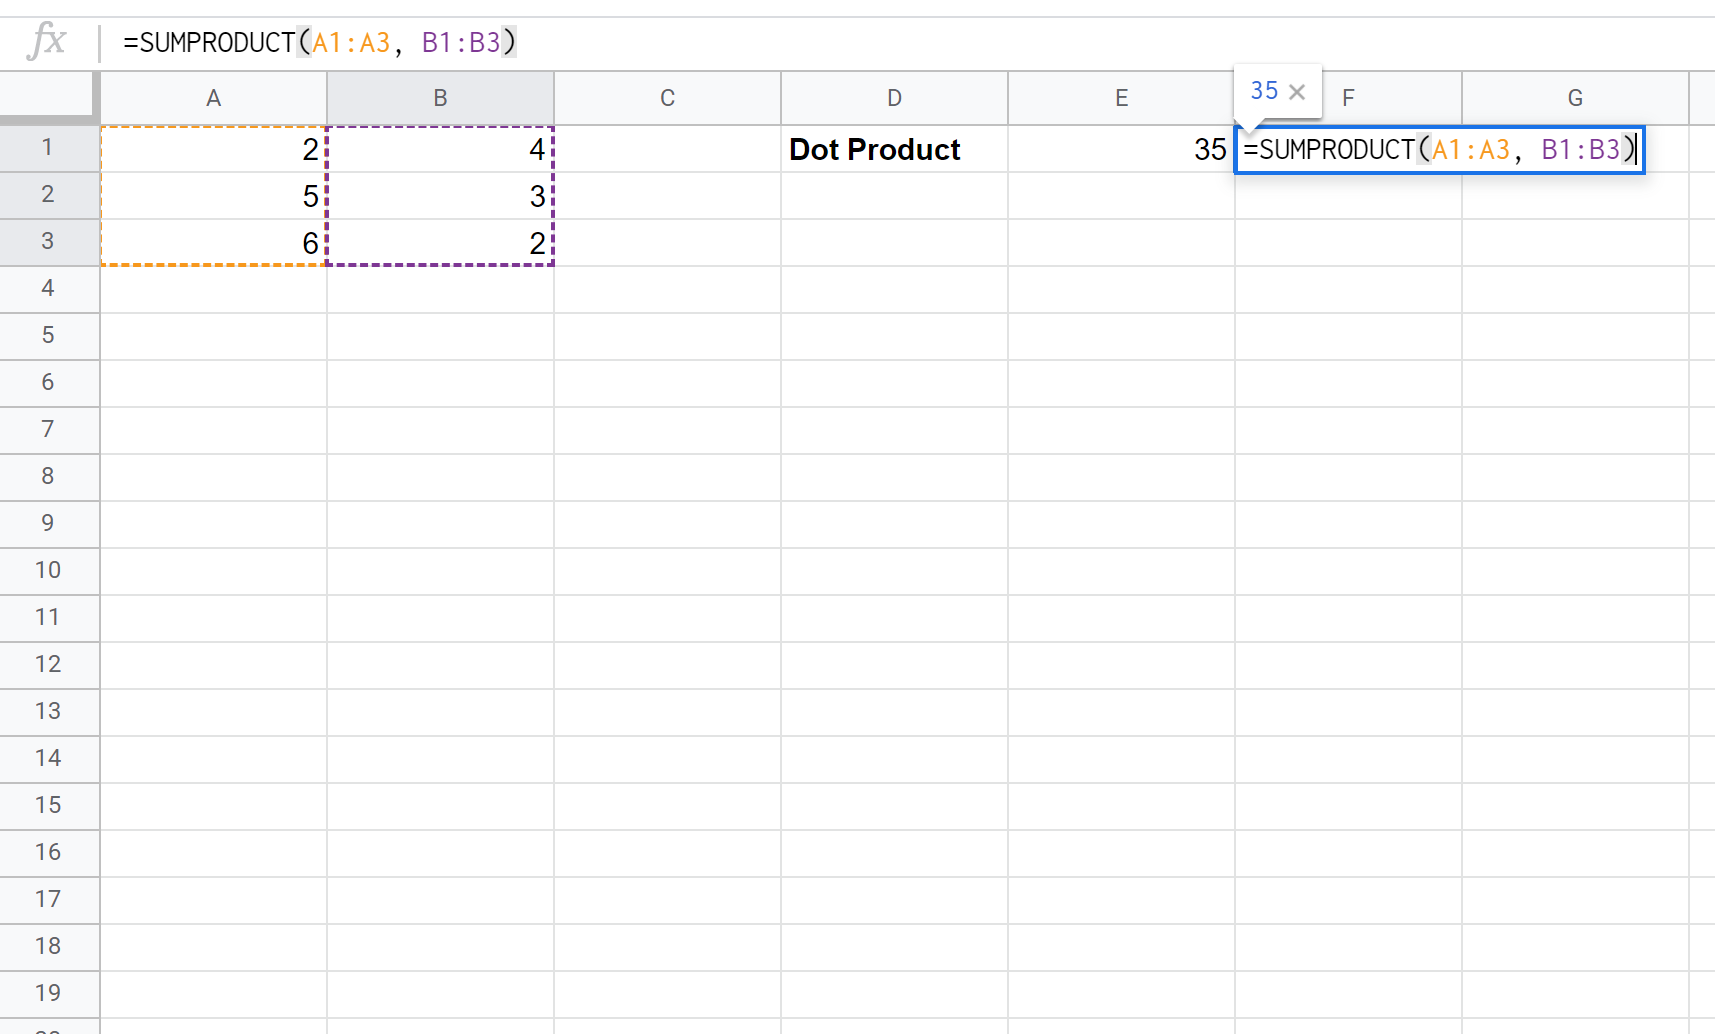 Dot product in Google Sheets